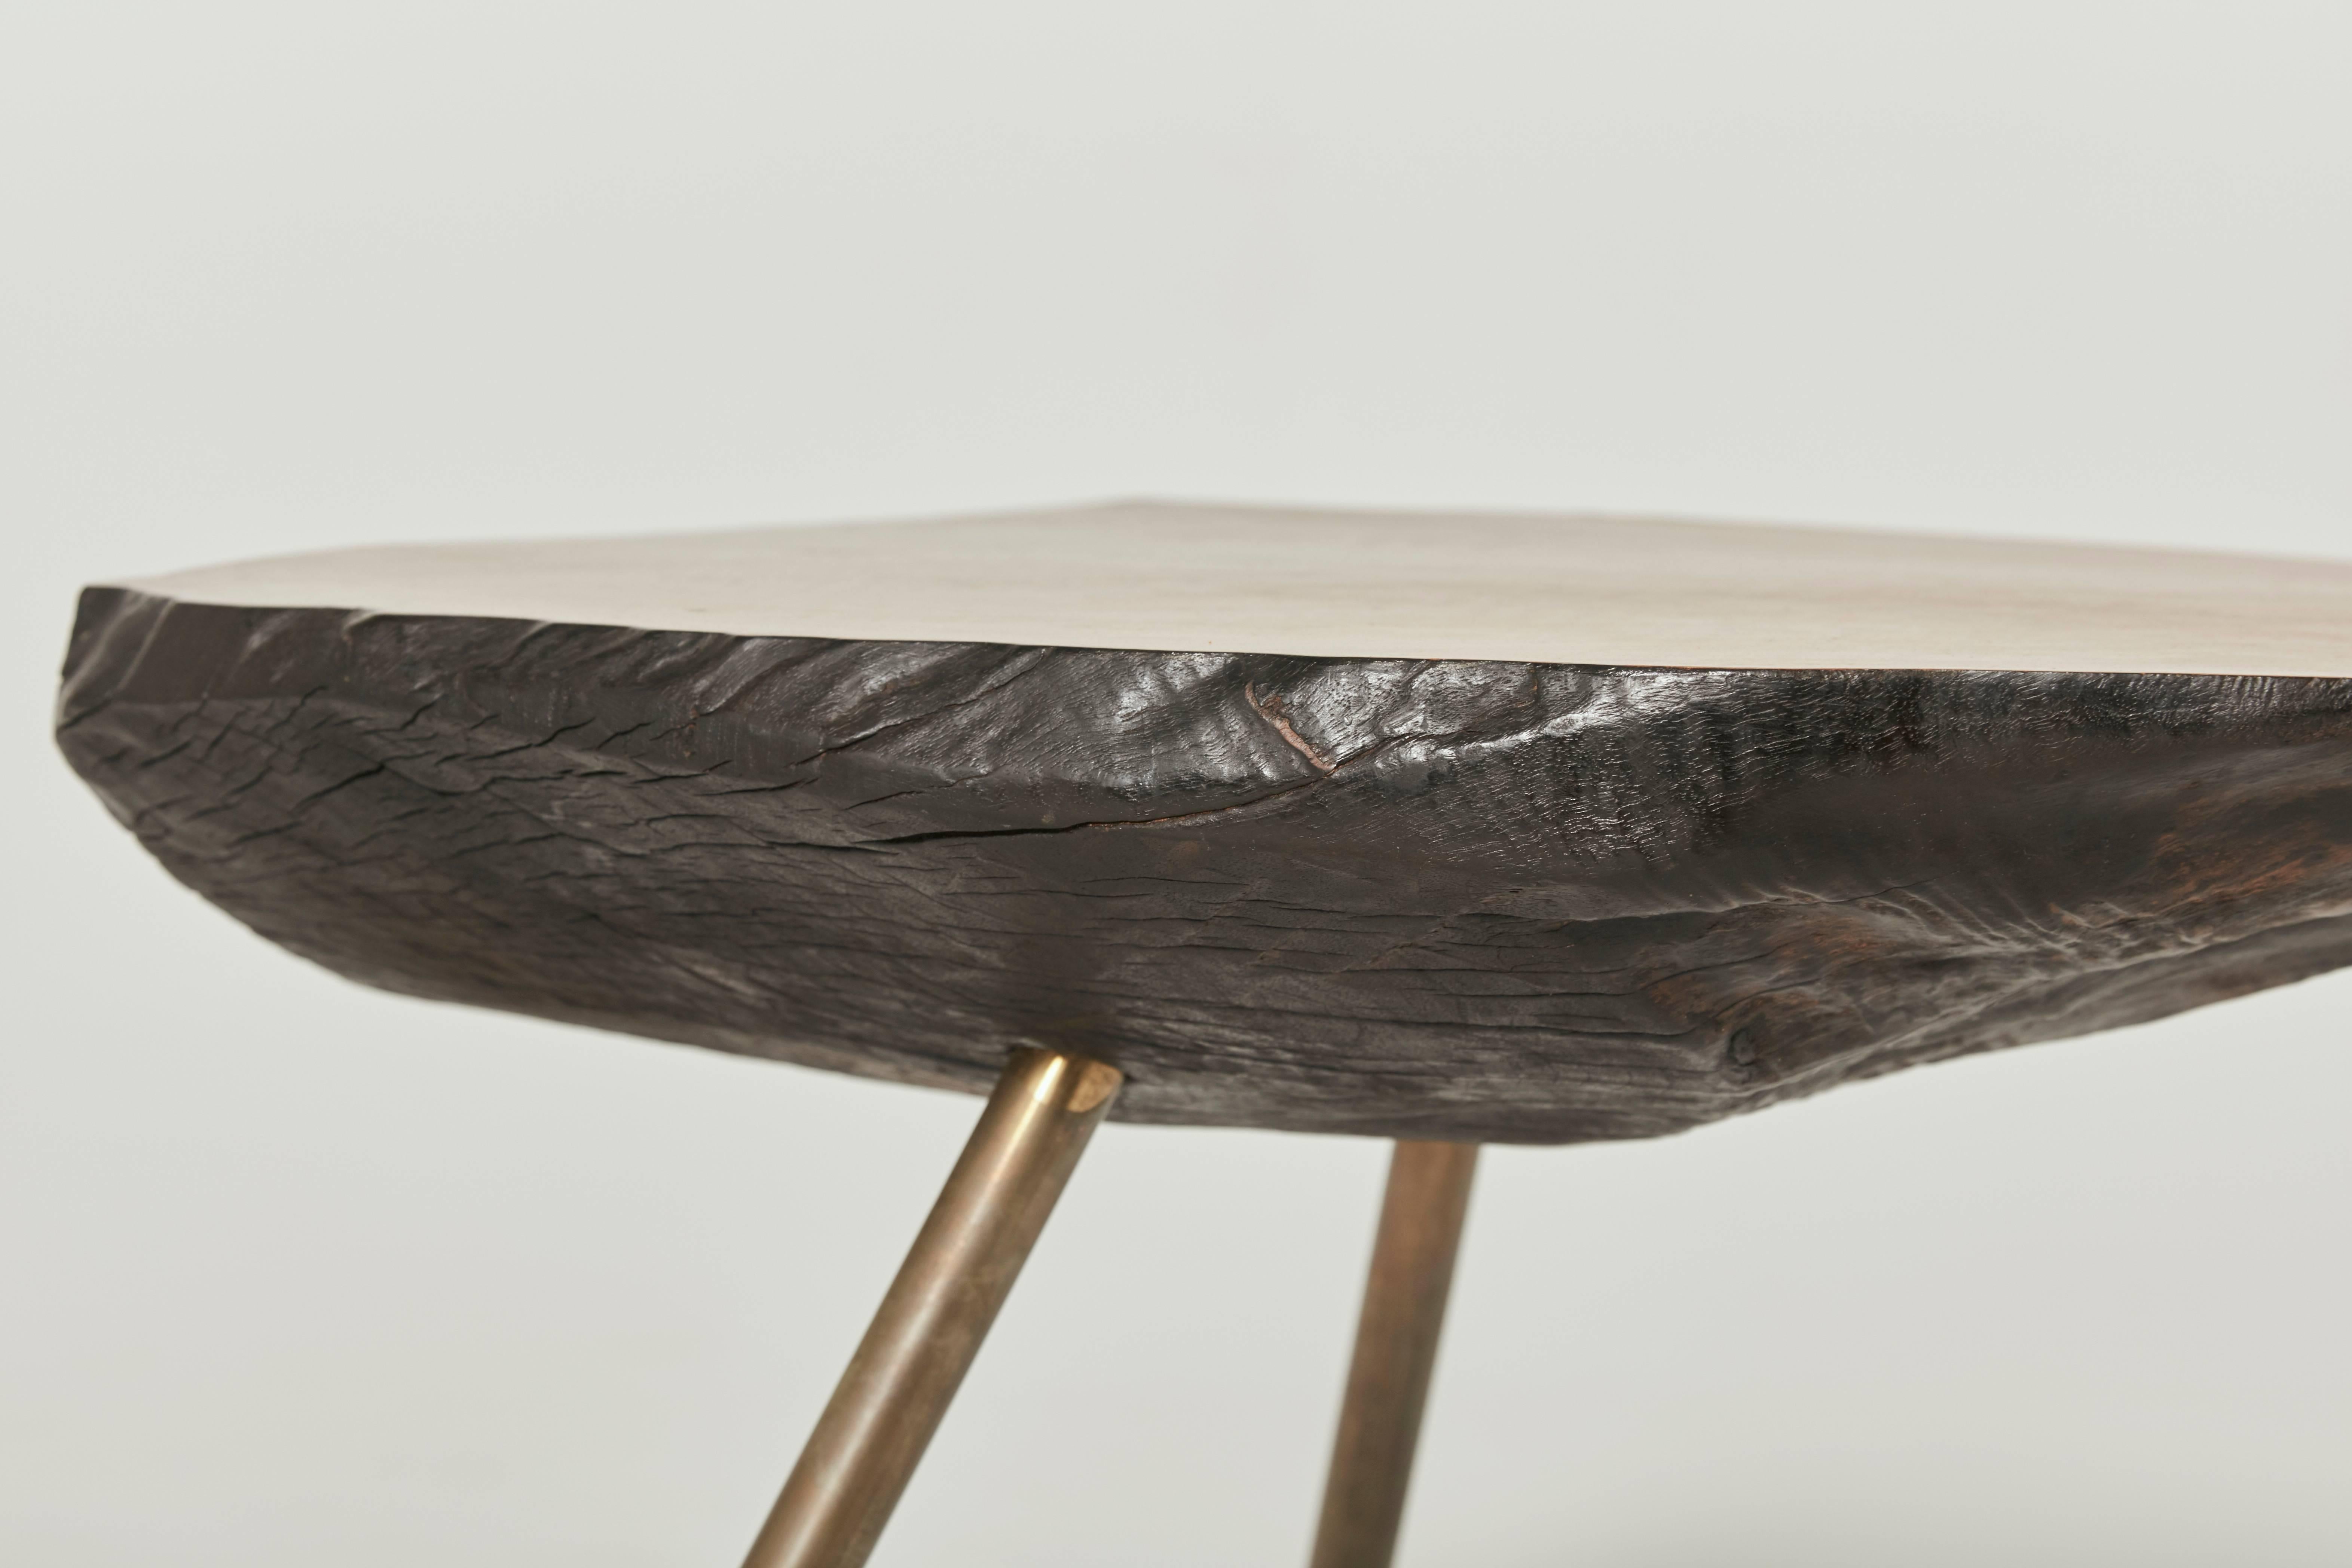 20th Century Large Midcentury Tree Trunk Table Attributed to Carl Auböck, Austria, 1950s